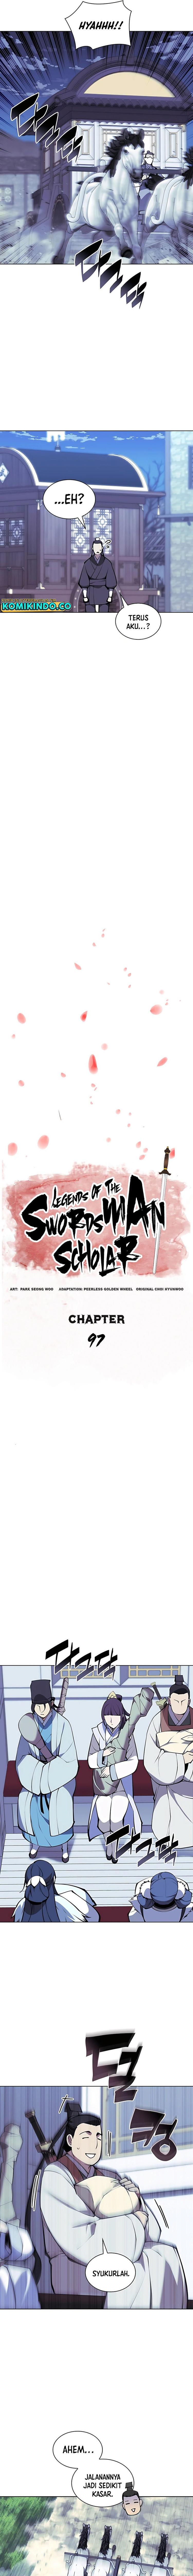 Records of the Swordsman Scholar Chapter 97